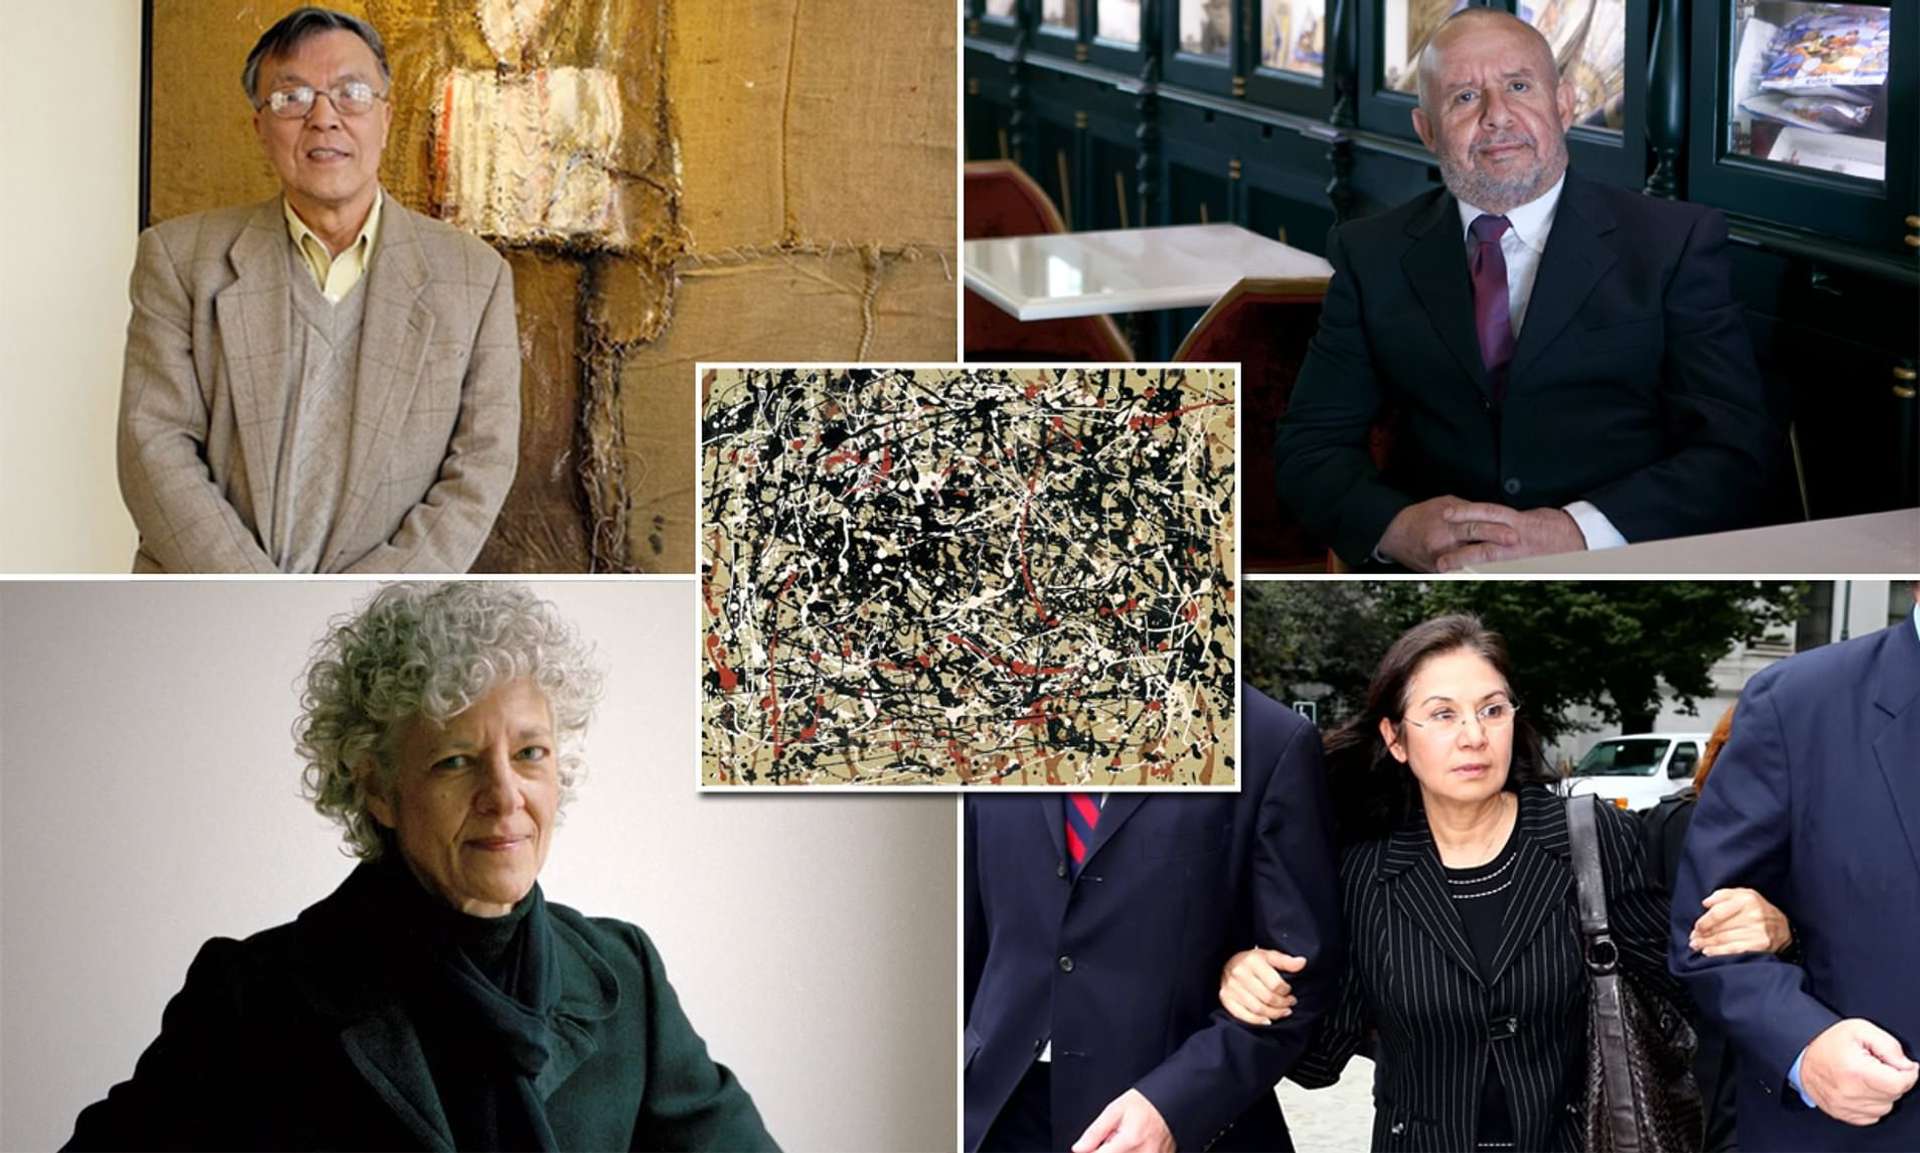 A collage of the main players in the Knoedler scandal (clockwise): Pei-Shen Qian, Jose Carlos Bergantinos Diaz, Glafira Rosales and Ann Freedman. In the centre, one of the fake paintings attributed to Jackson Pollock